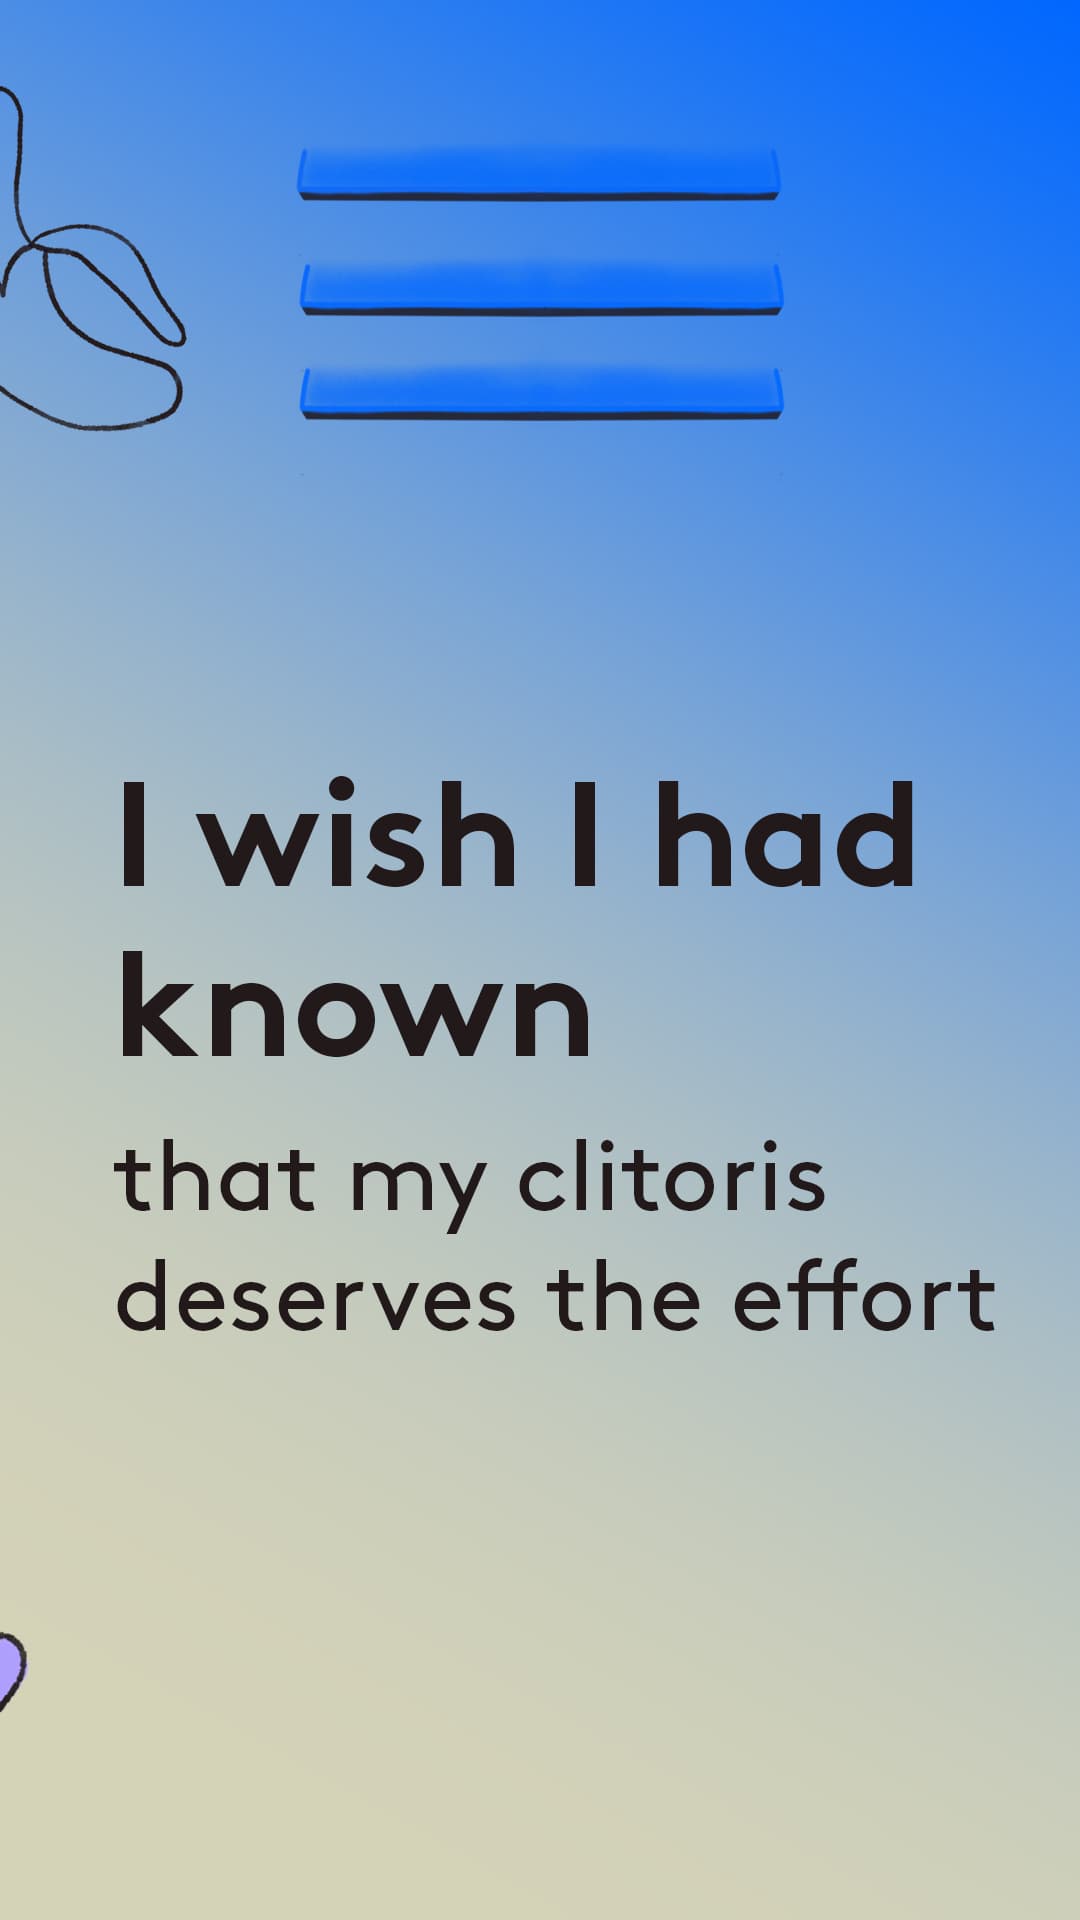 I wish i had known that my clitoris deservees the effort